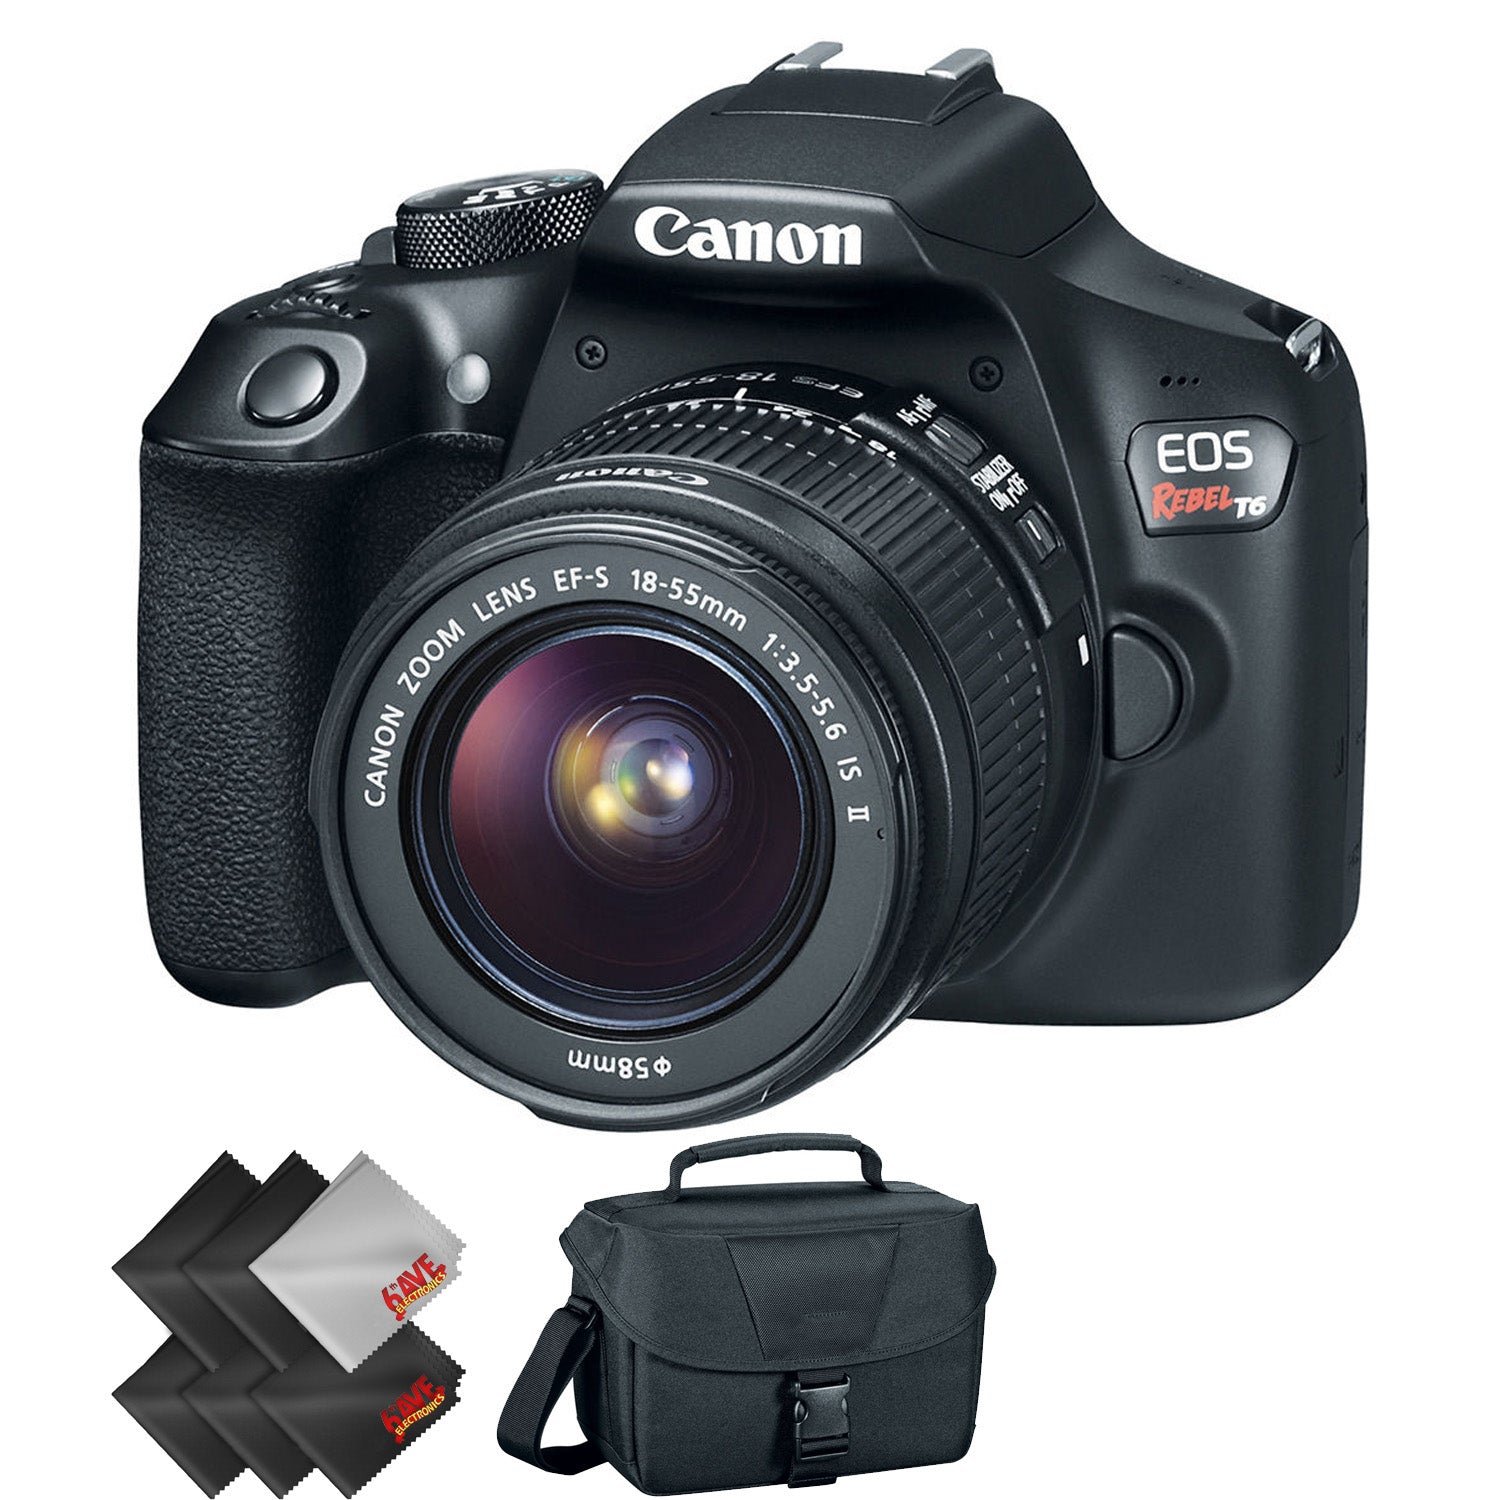 Canon EOS Rebel T6 DSLR Camera with 18-55mm Lens + 2 Year Accidental Warranty Bundle